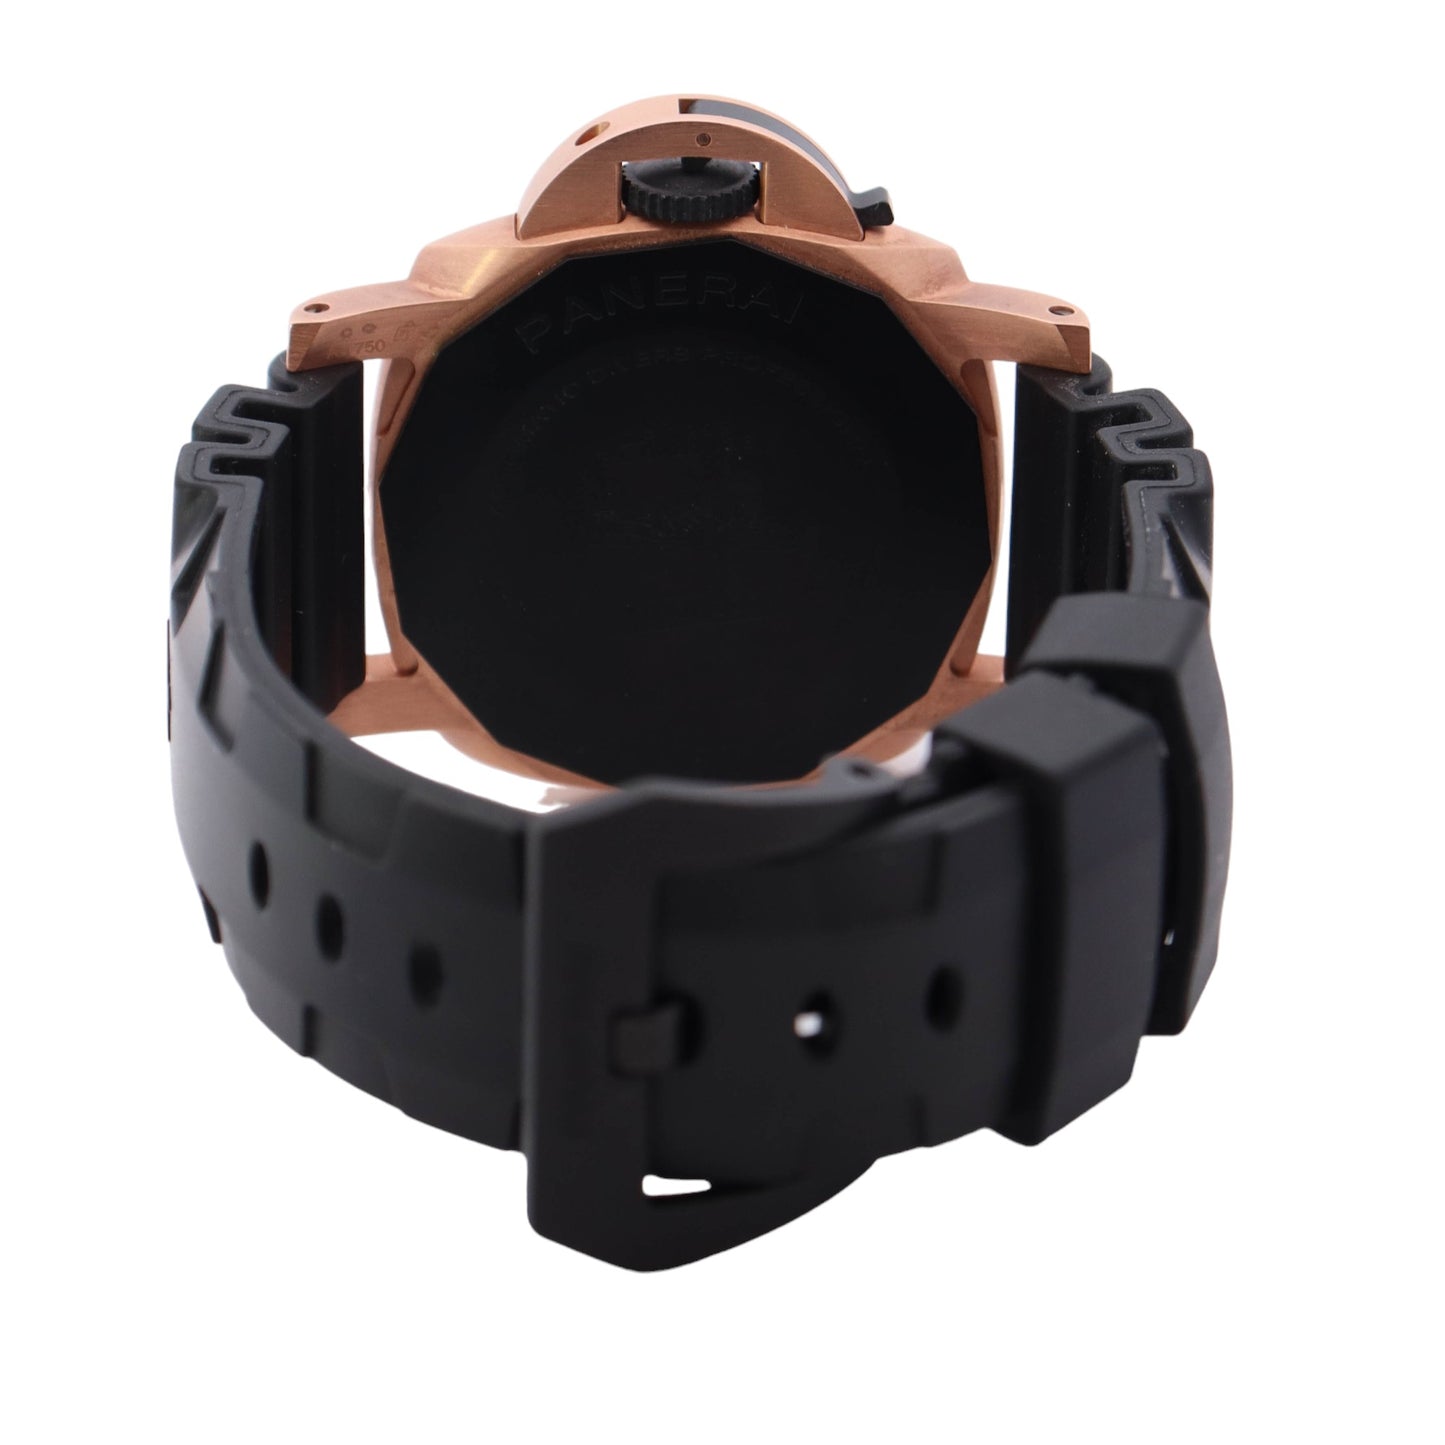 Panerai Submersible Rose Gold 44mm Black Dot Dial Watch Reference #: PAM01070 - Happy Jewelers Fine Jewelry Lifetime Warranty